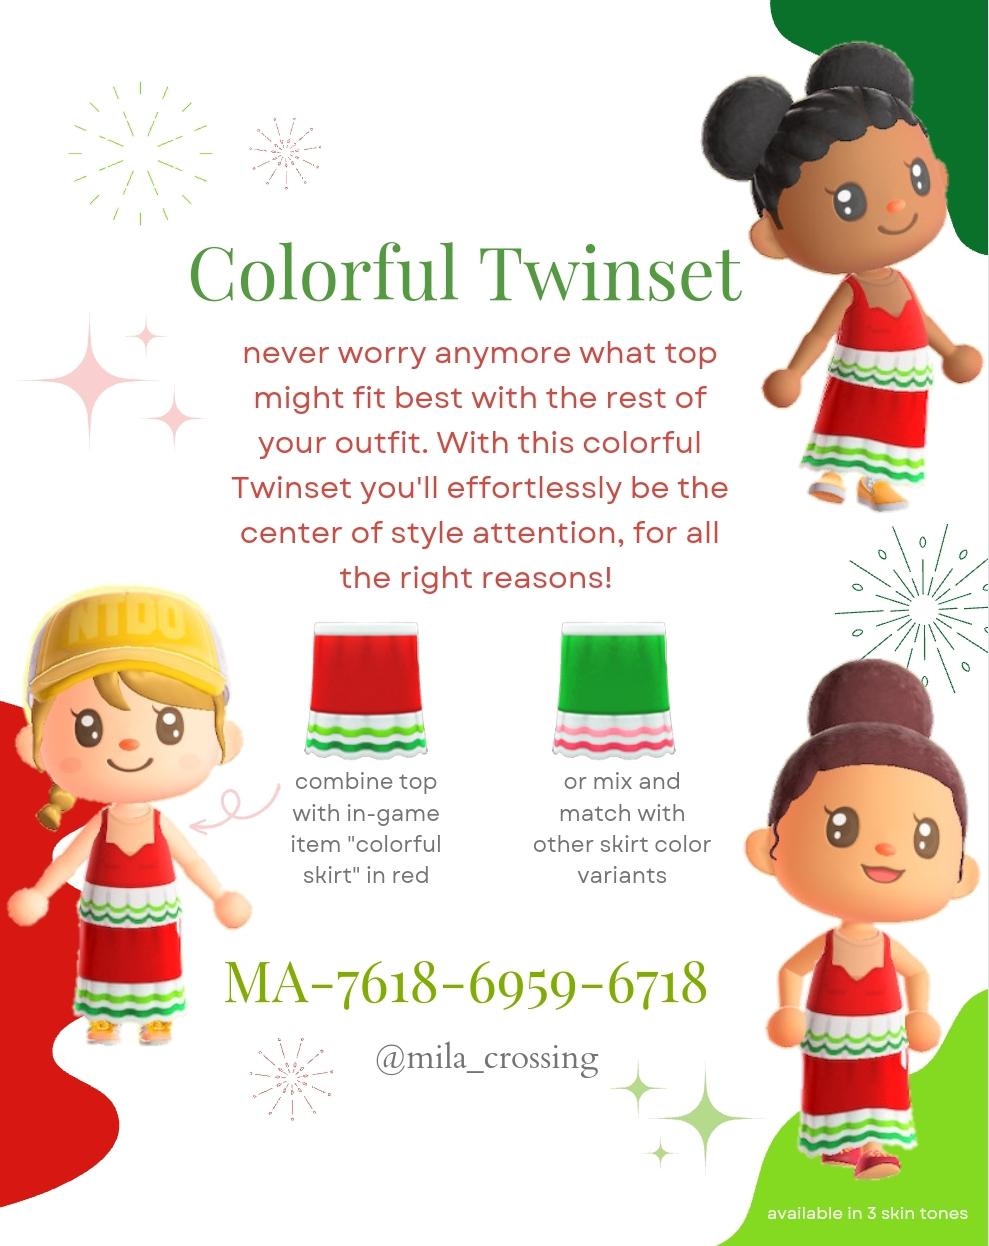 Animal Crossing colorful Twinset